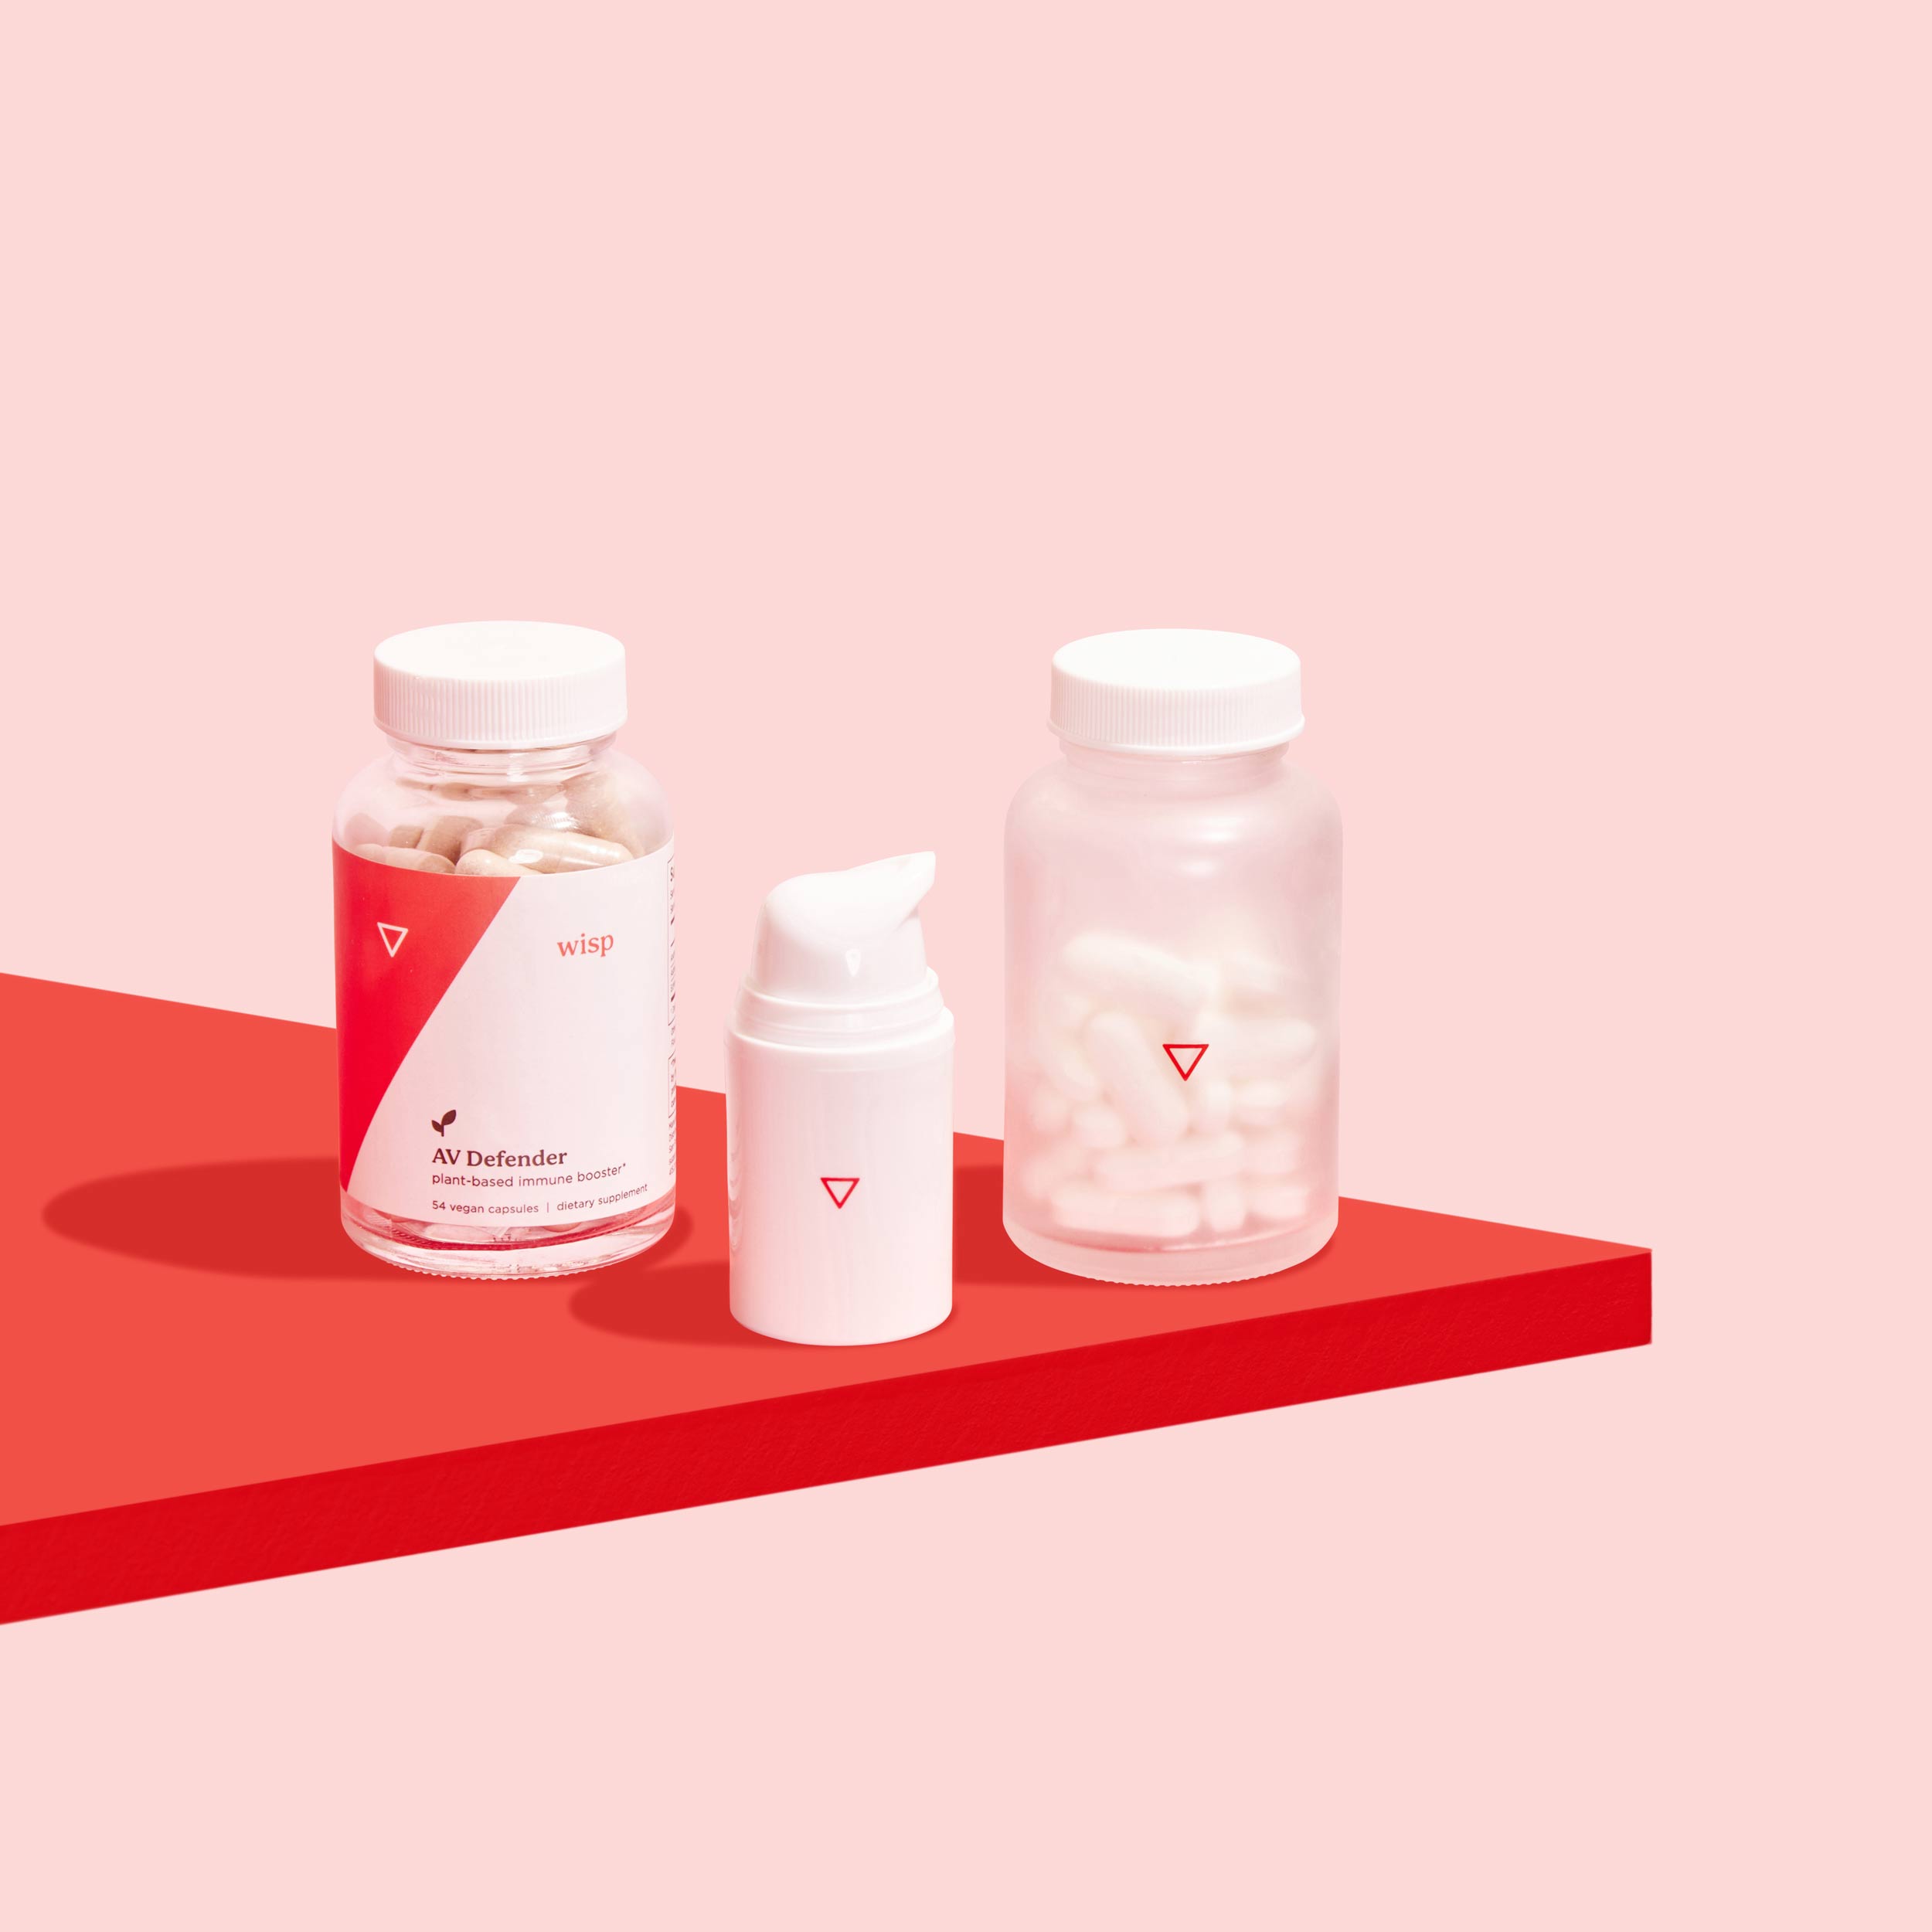 Bottle of AV Defender, bottle of acyclovir cream, and bottle of valacyclovir tablets to treat and prevent oral and genital herpes outbreaks on a red surface, on a pink background